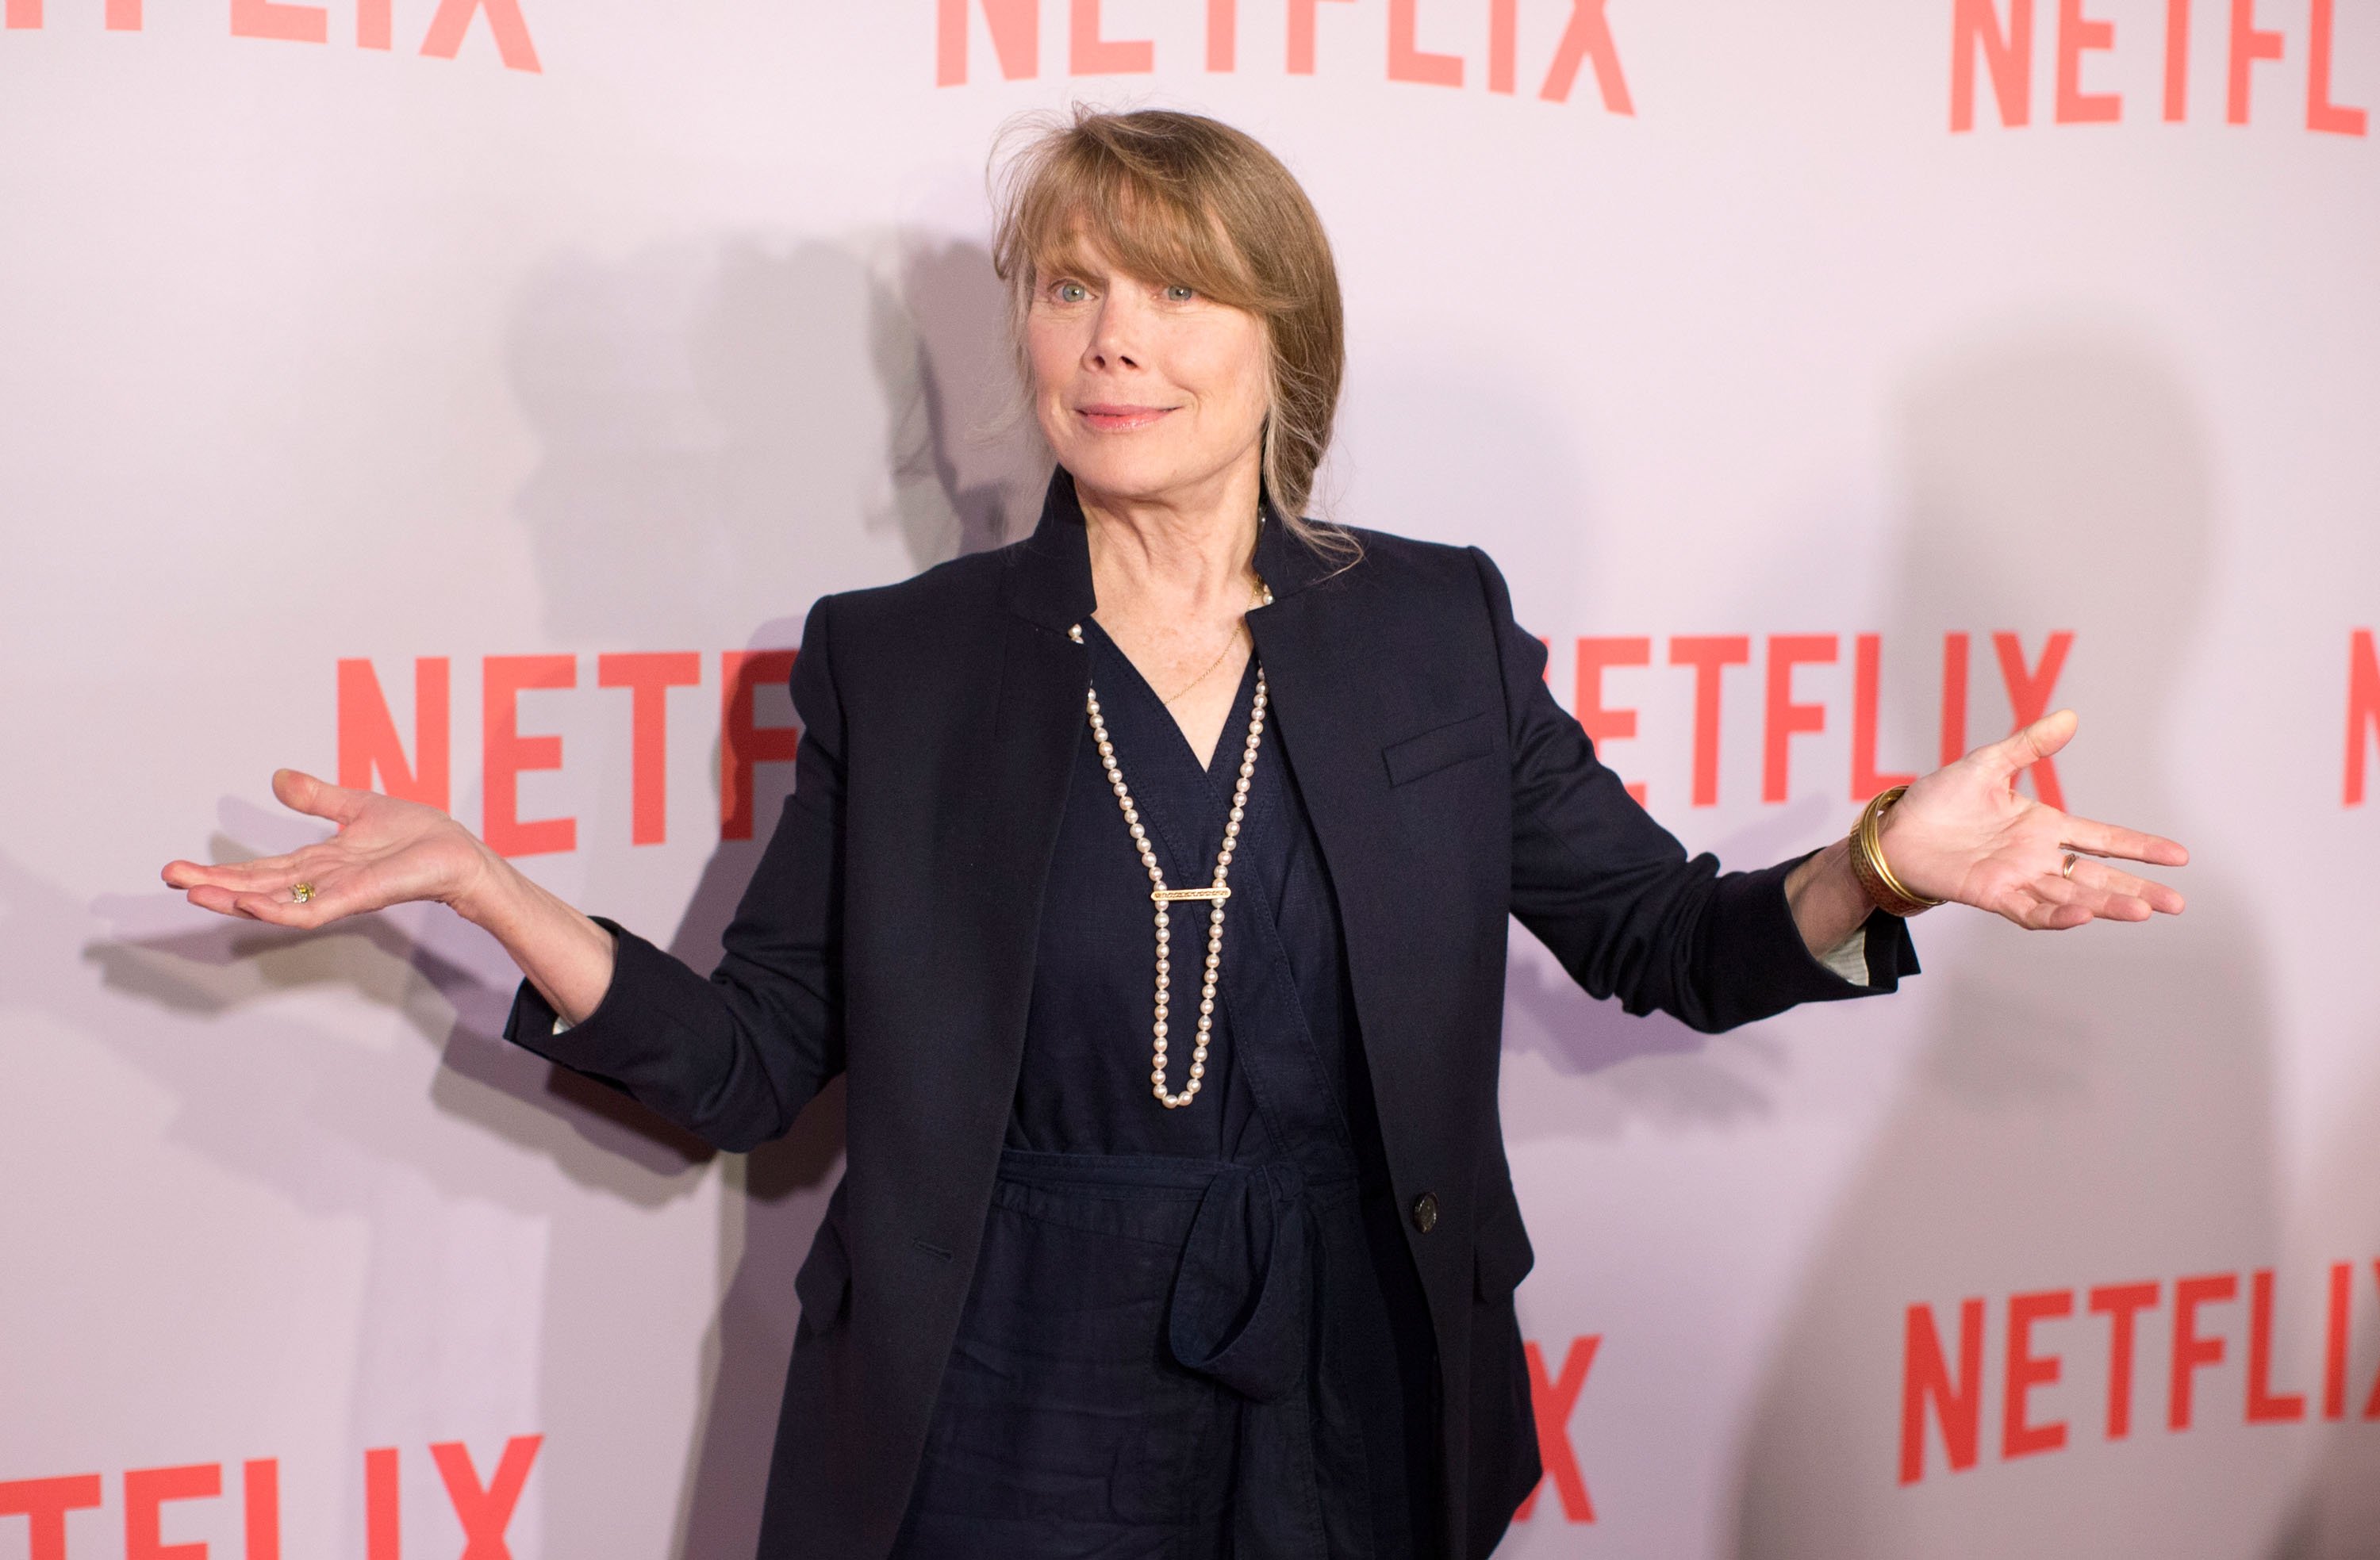 Sissy Spacek attends Netflix's "Bloodline" Screening And Q&A attends at Pacific Design Center on May 4, 2015, in West Hollywood, California. | Source: Getty Images.